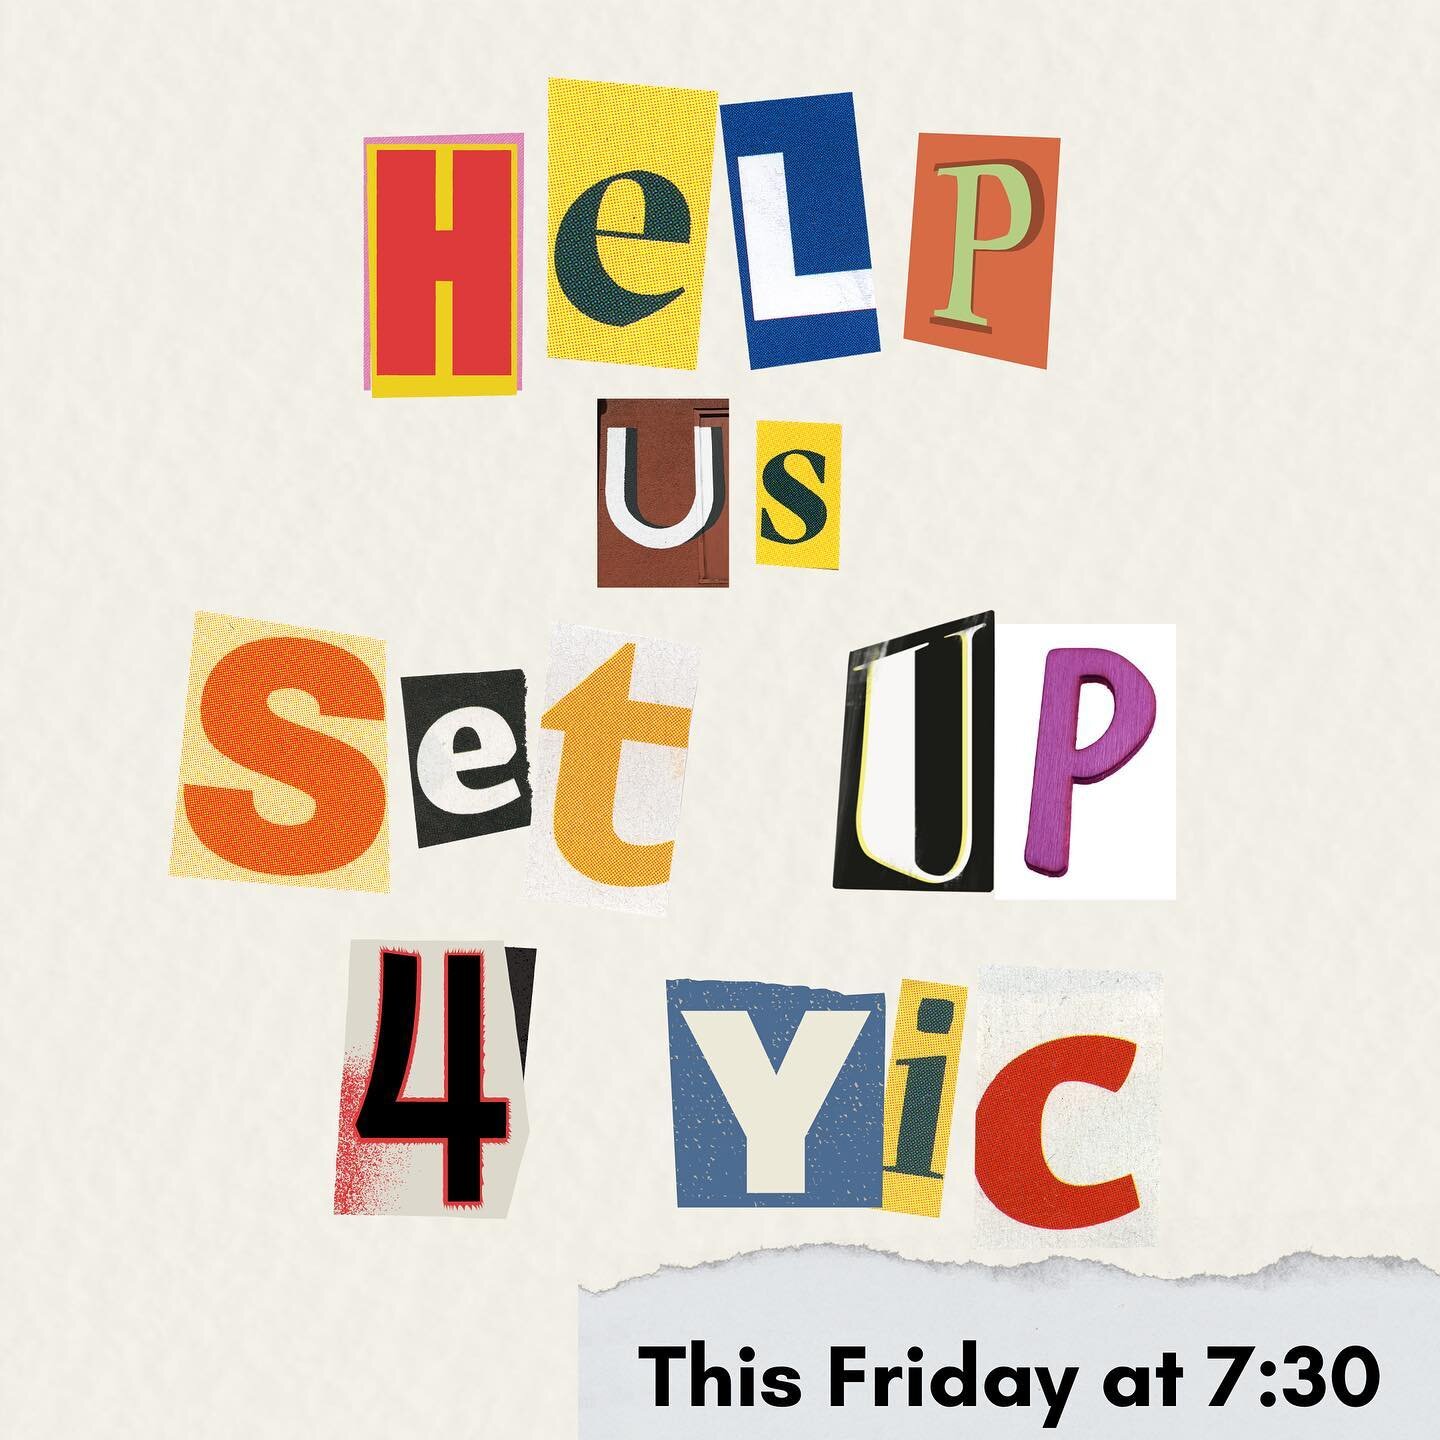 This Sunday we will be hosting the YIC event. We would love if you came along to help us set up tonight at 7:30